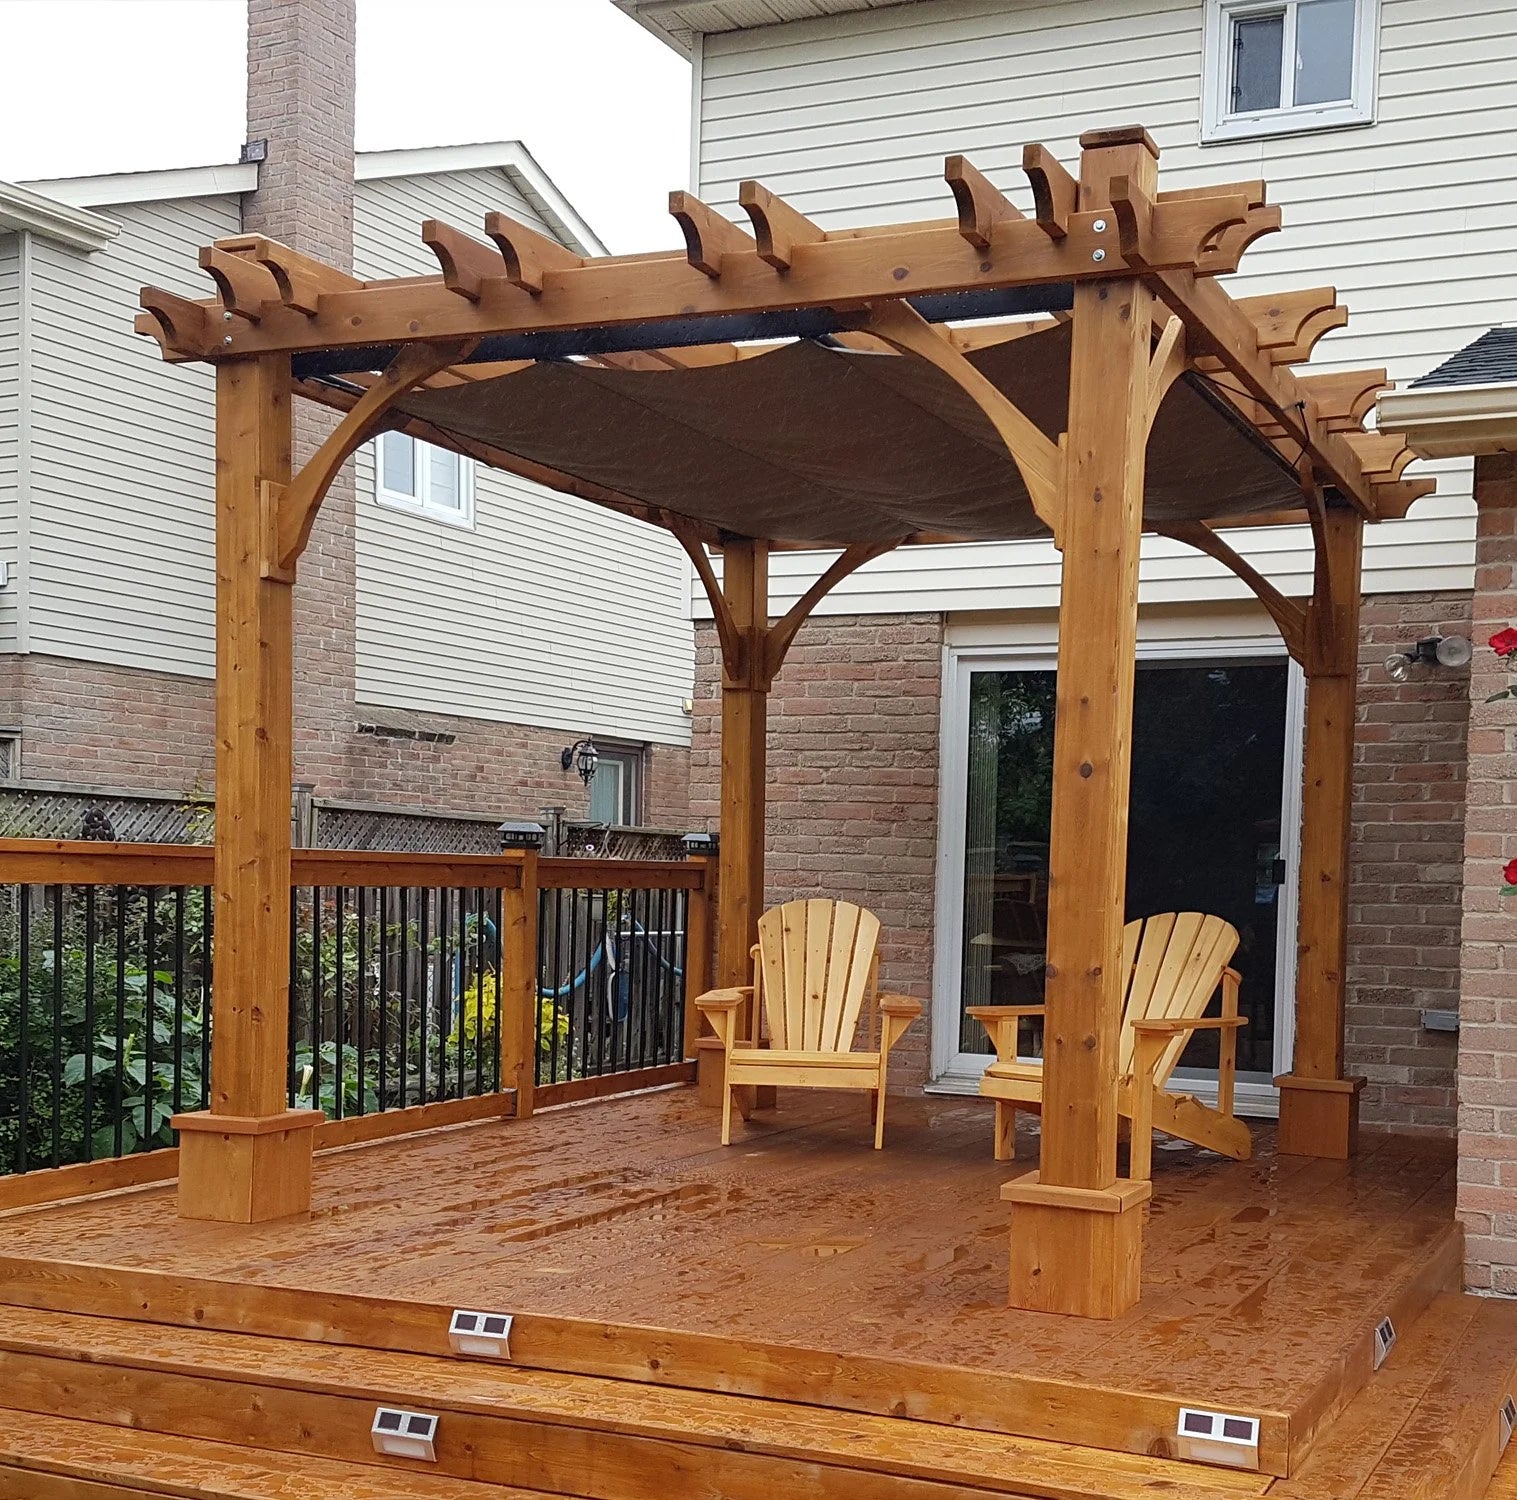 Outdoor Living Today Pergola with Retractable Canopy outdoor lounge chairs on a wooden deck